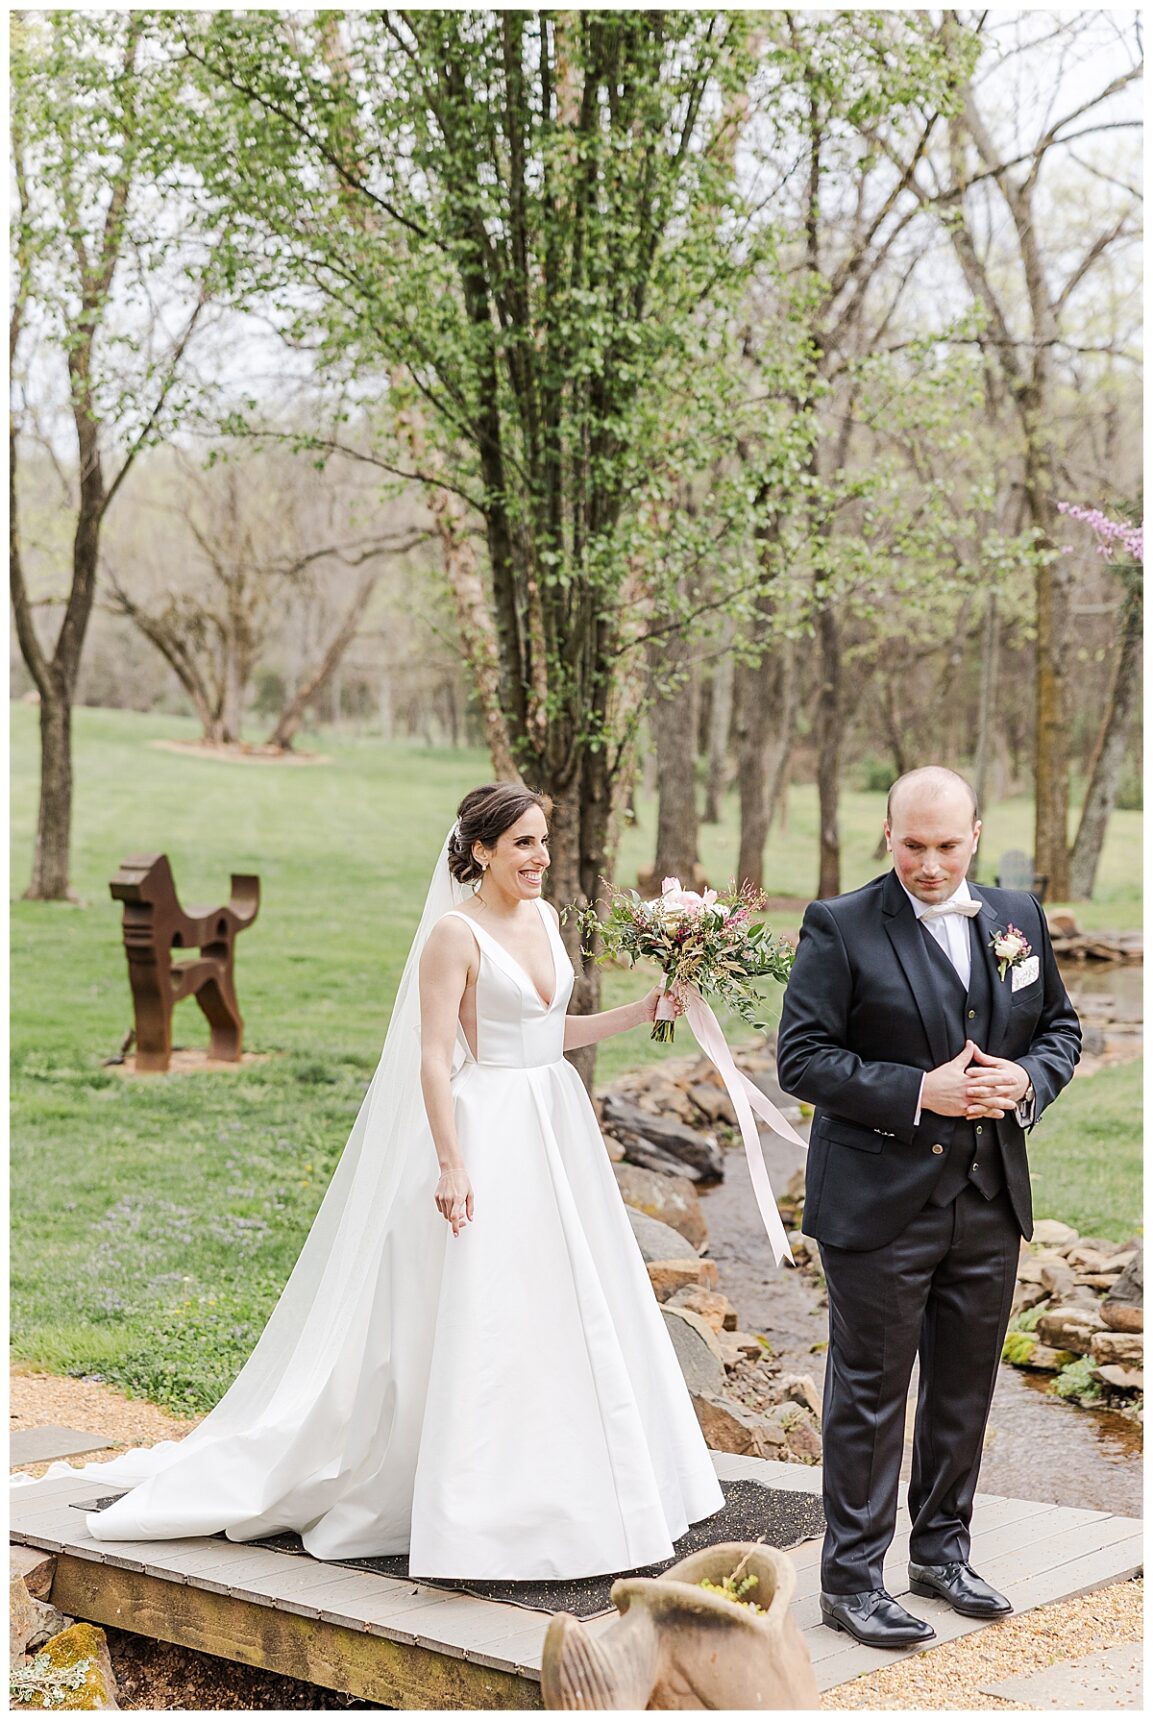 Inn at Willow Grove; Charlottesville Wedding Photographer; Brooke Danielle Photography; Virginia Weddings; Virginia Wedding Photographer; Jackie & Zac; Southern Weddings; First Look Wedding;